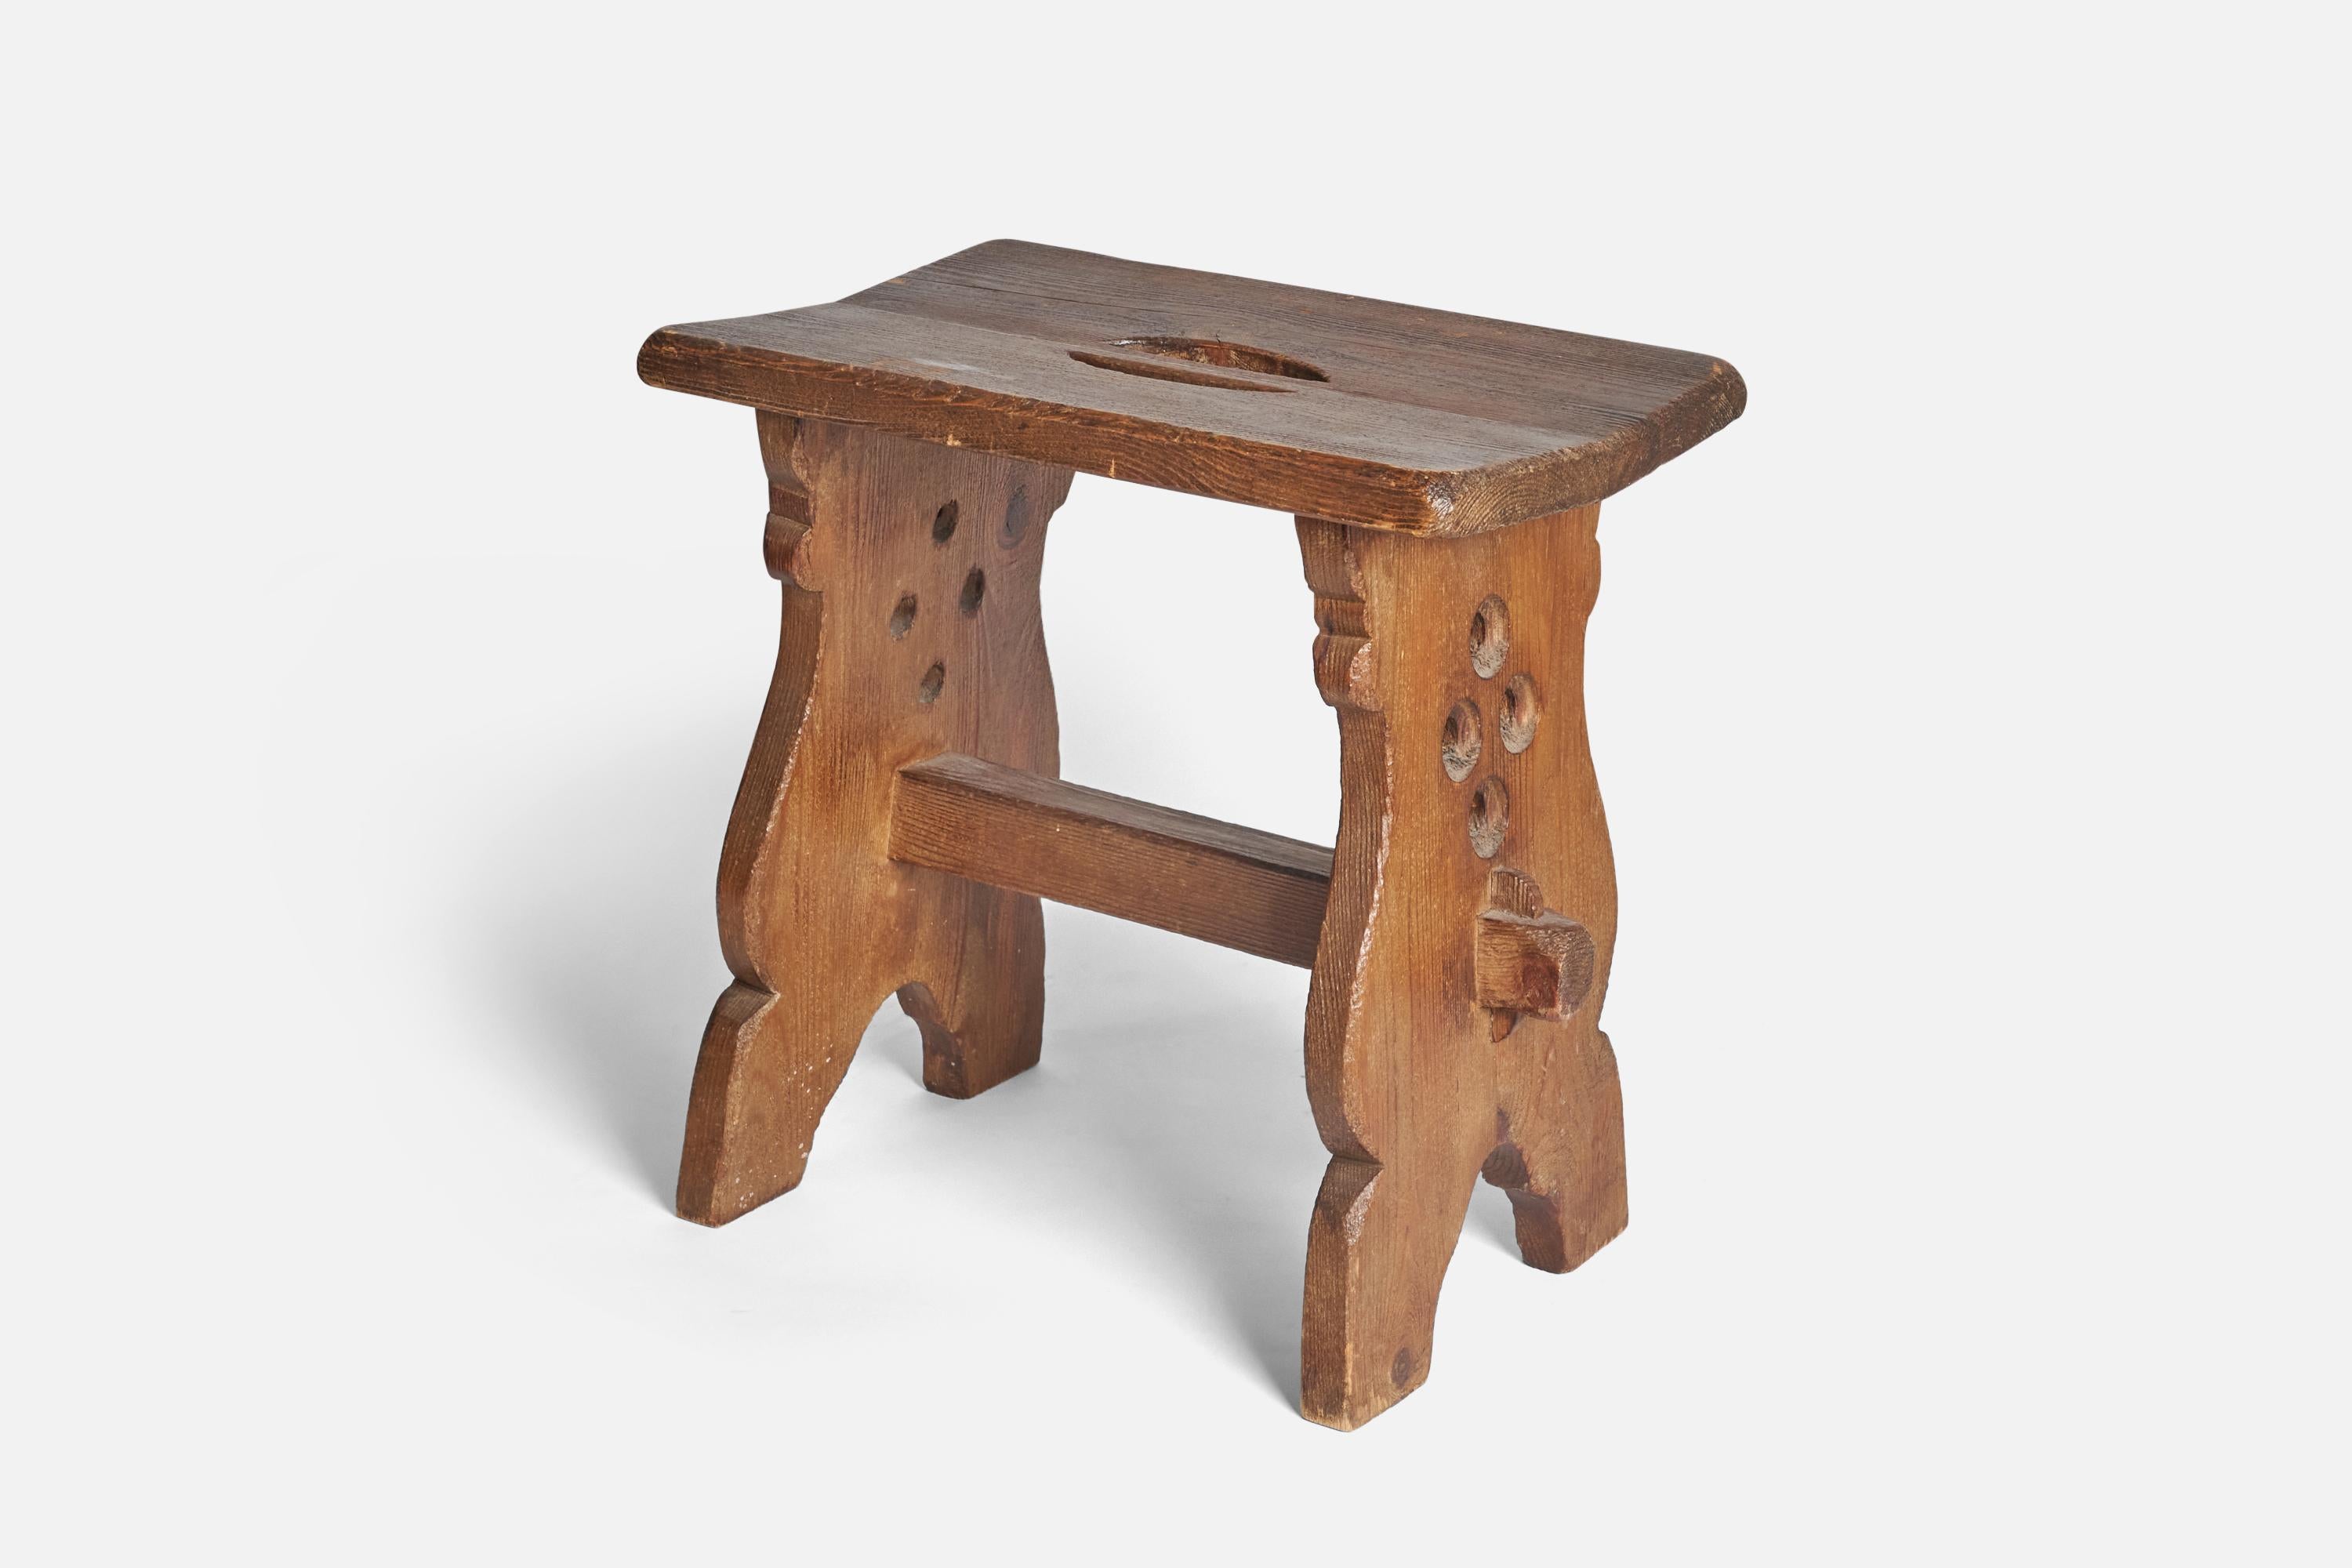 A stained pine stool designed and produced in Sweden, circa 1940s.